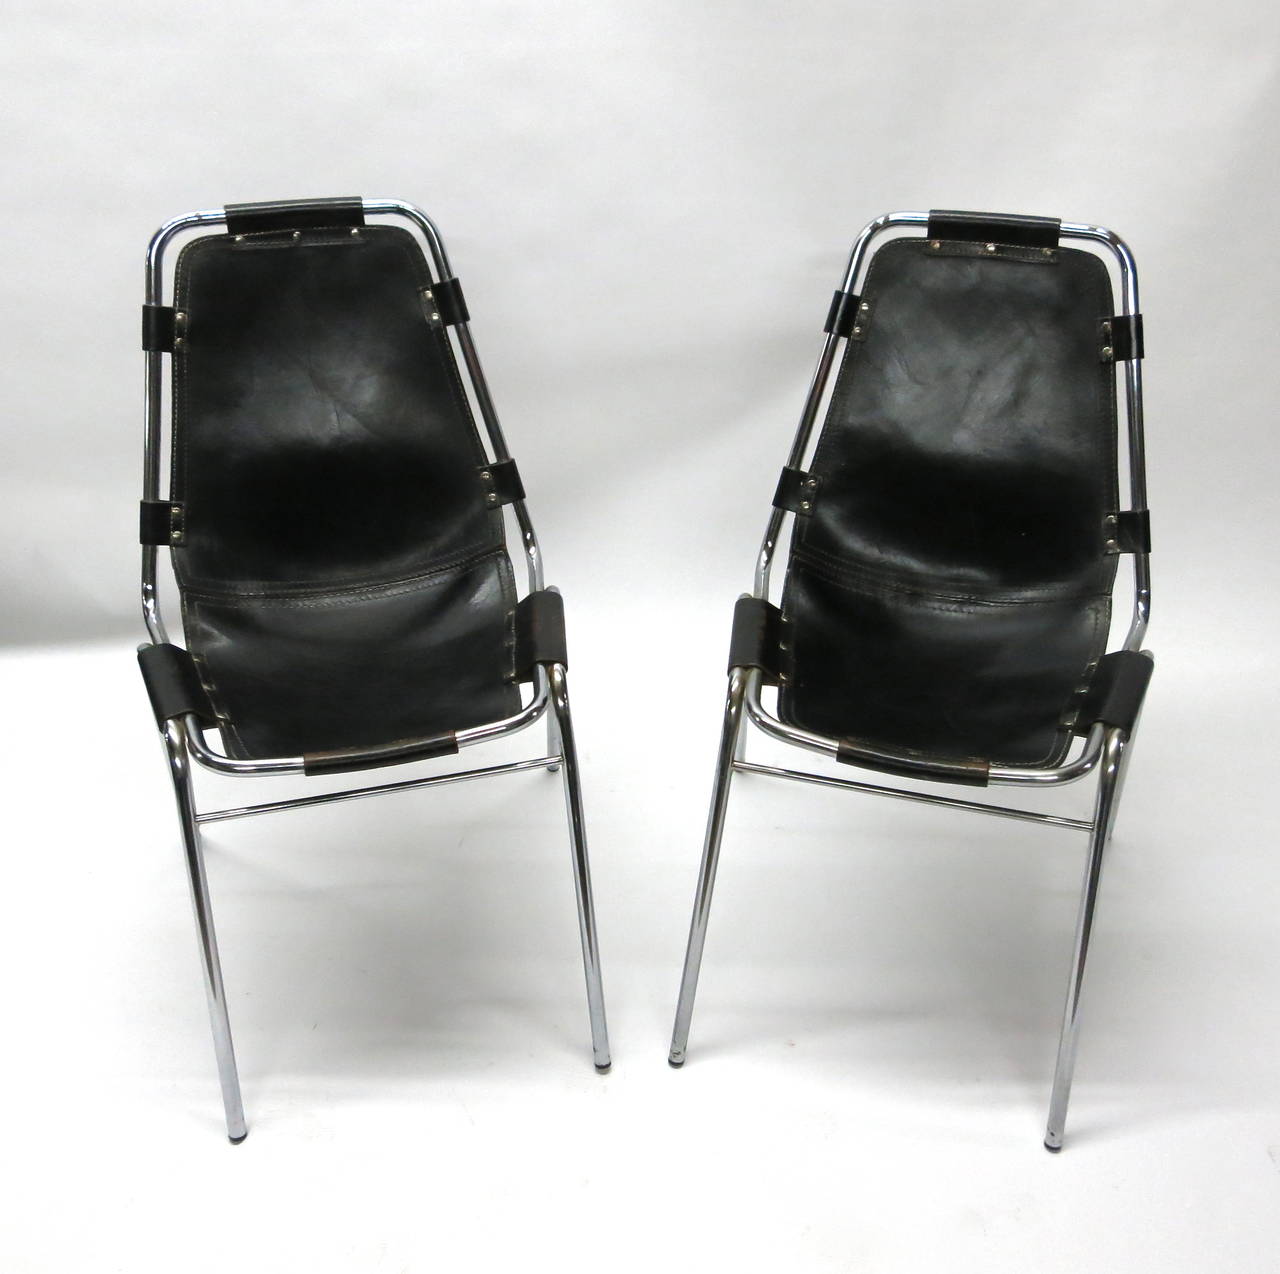 Pair of chairs all original with tubular chrome base and frame that supports a  leather seat and back. The leather is stitched together joining the seat and back and attached to the frame by eight leather straps that wrap the around the frame and